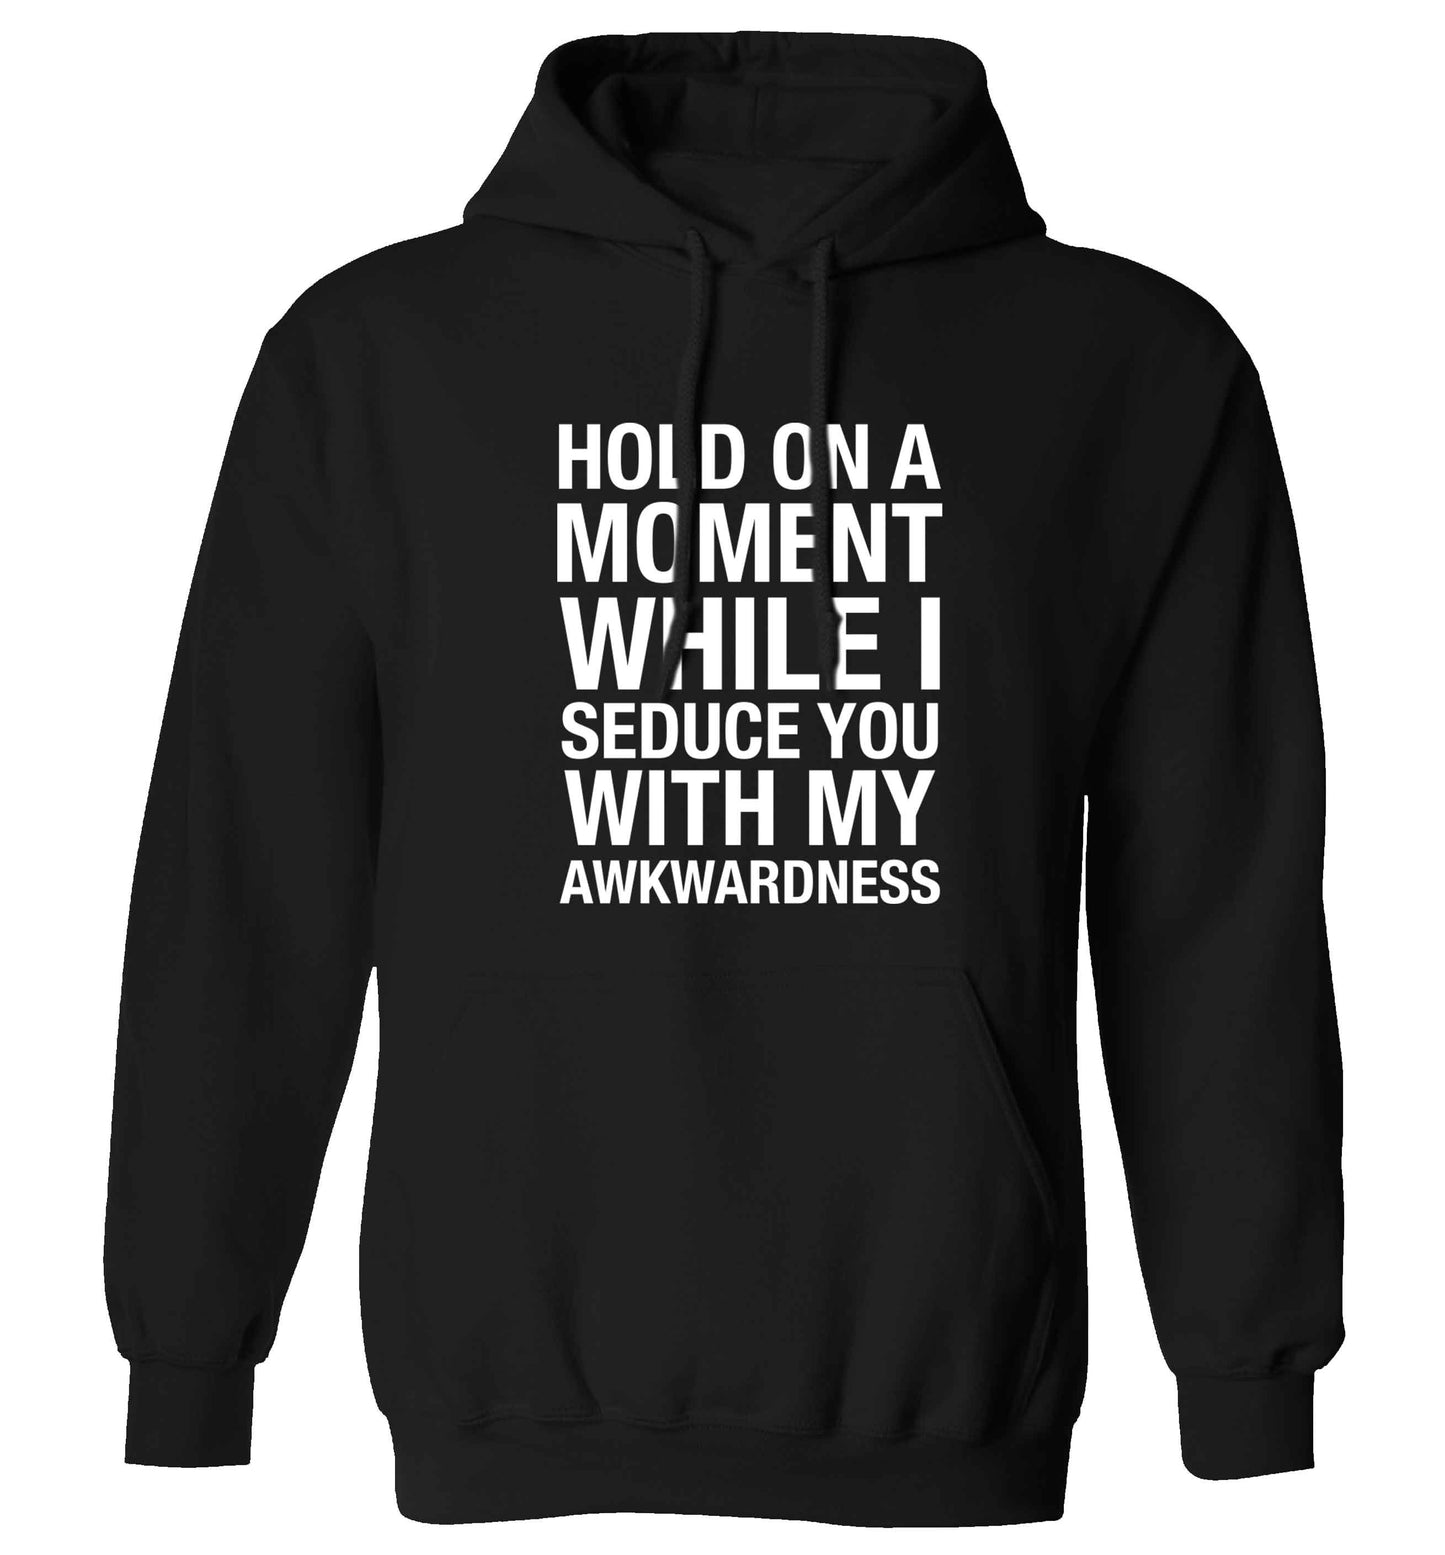 Hold on a moment while I seduce you with my awkwardness adults unisex black hoodie 2XL